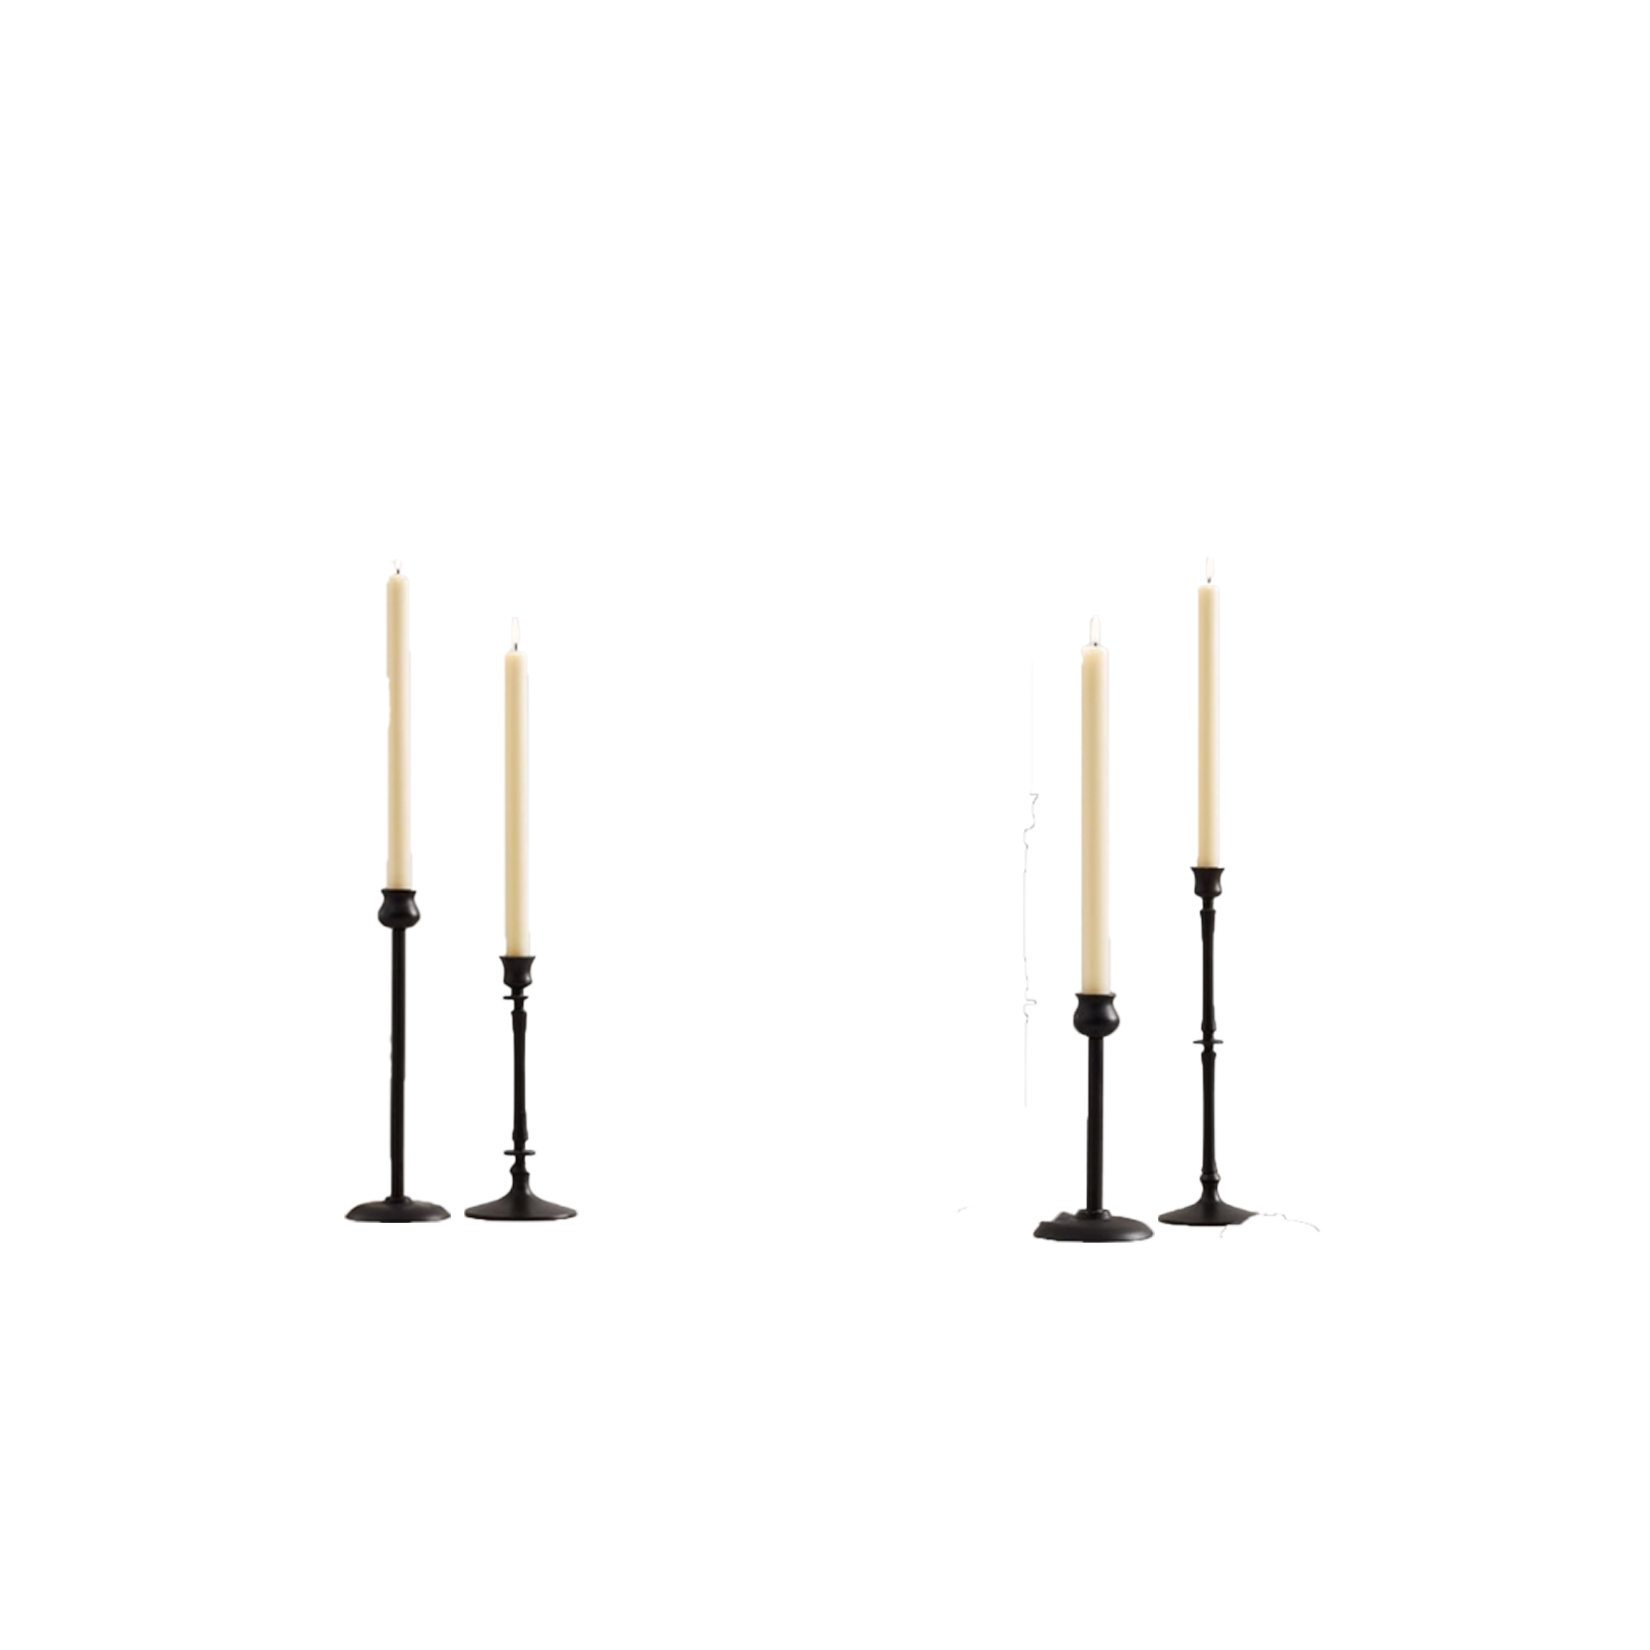 Booker Candleholders, Bronze Tapers, Set Of 4 - Image 1